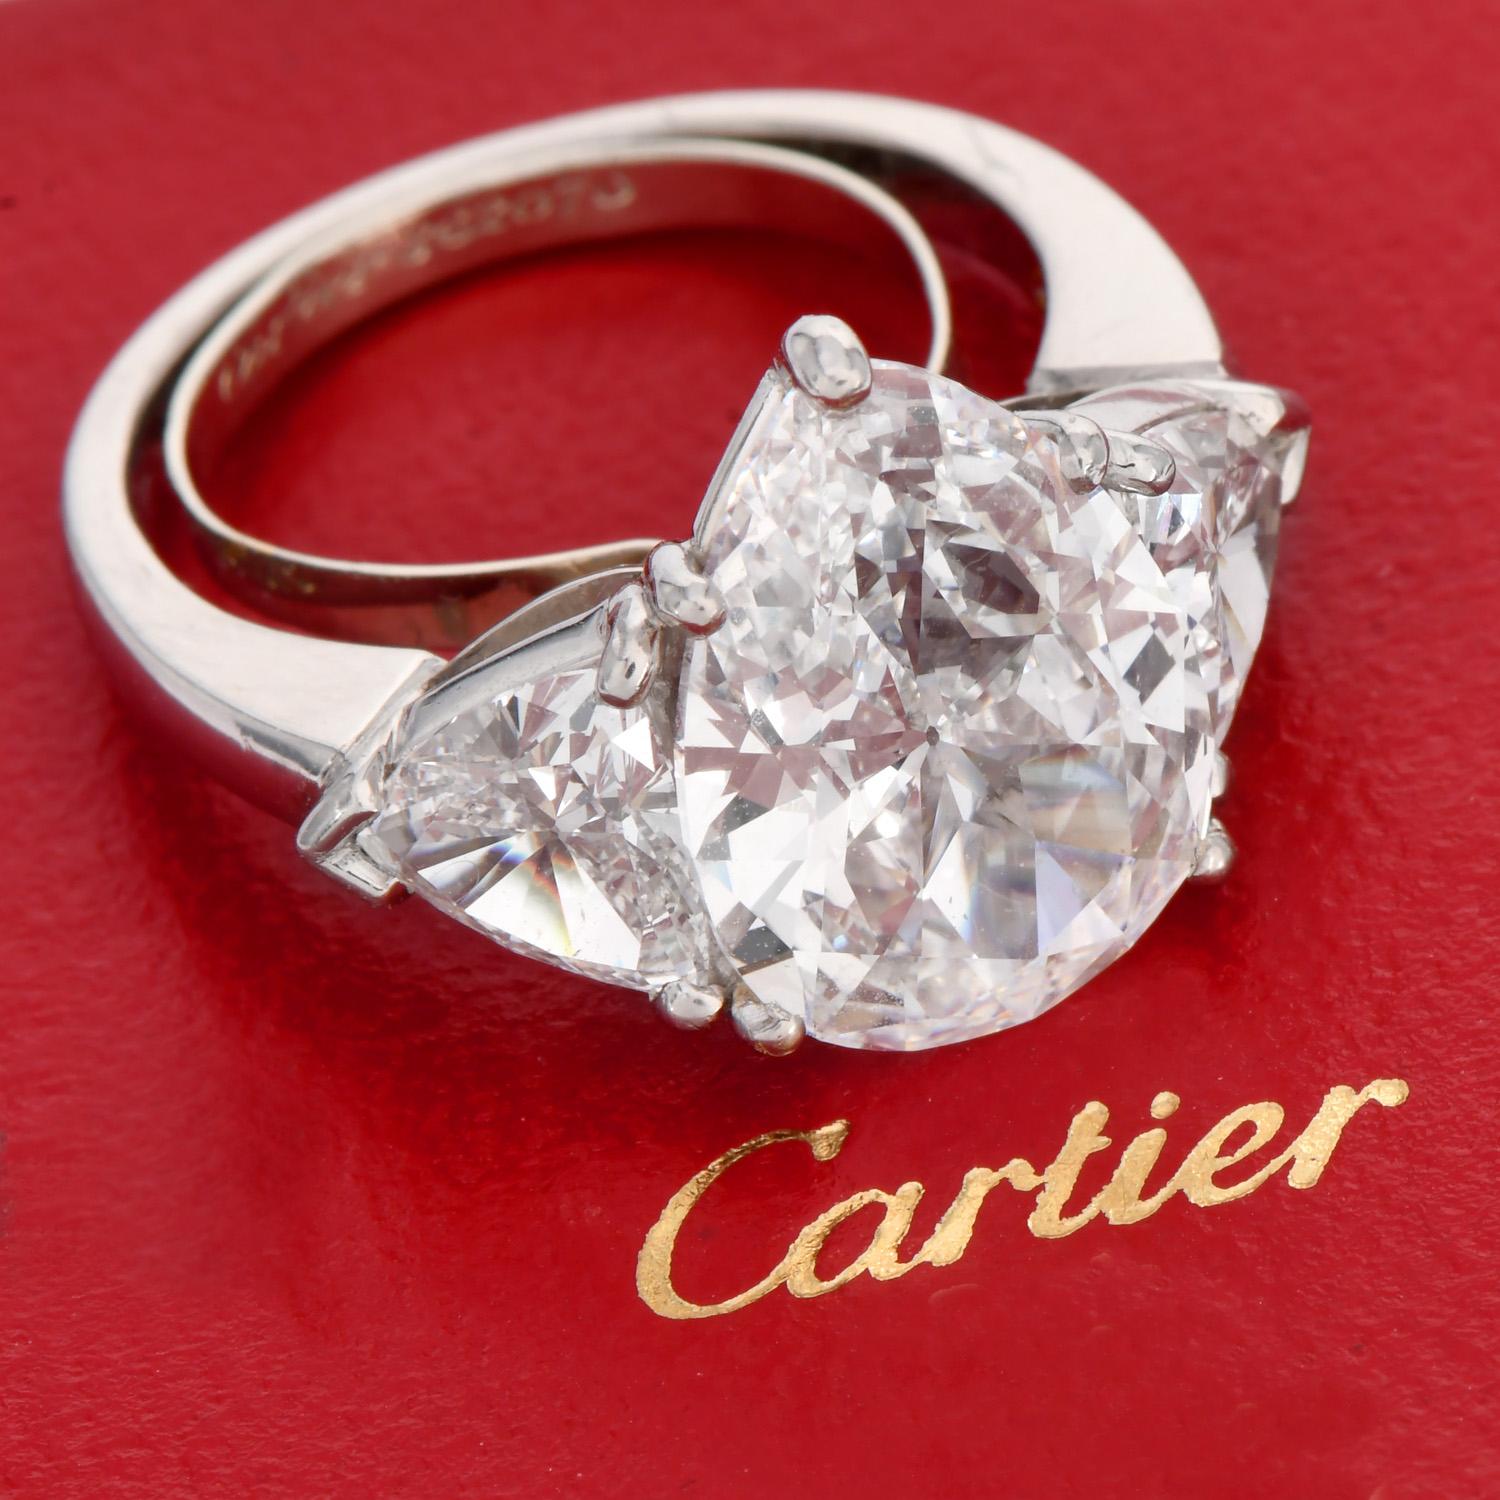 This Breathtaking Classic Cartier diamond ring is centered With a stunning pear-shaped natural diamond weighing 4.07cts, E color, VS1, set in a beautiful platinum setting.

This is an impeccable Diamond ring. This GIA-certified pear-shaped diamond